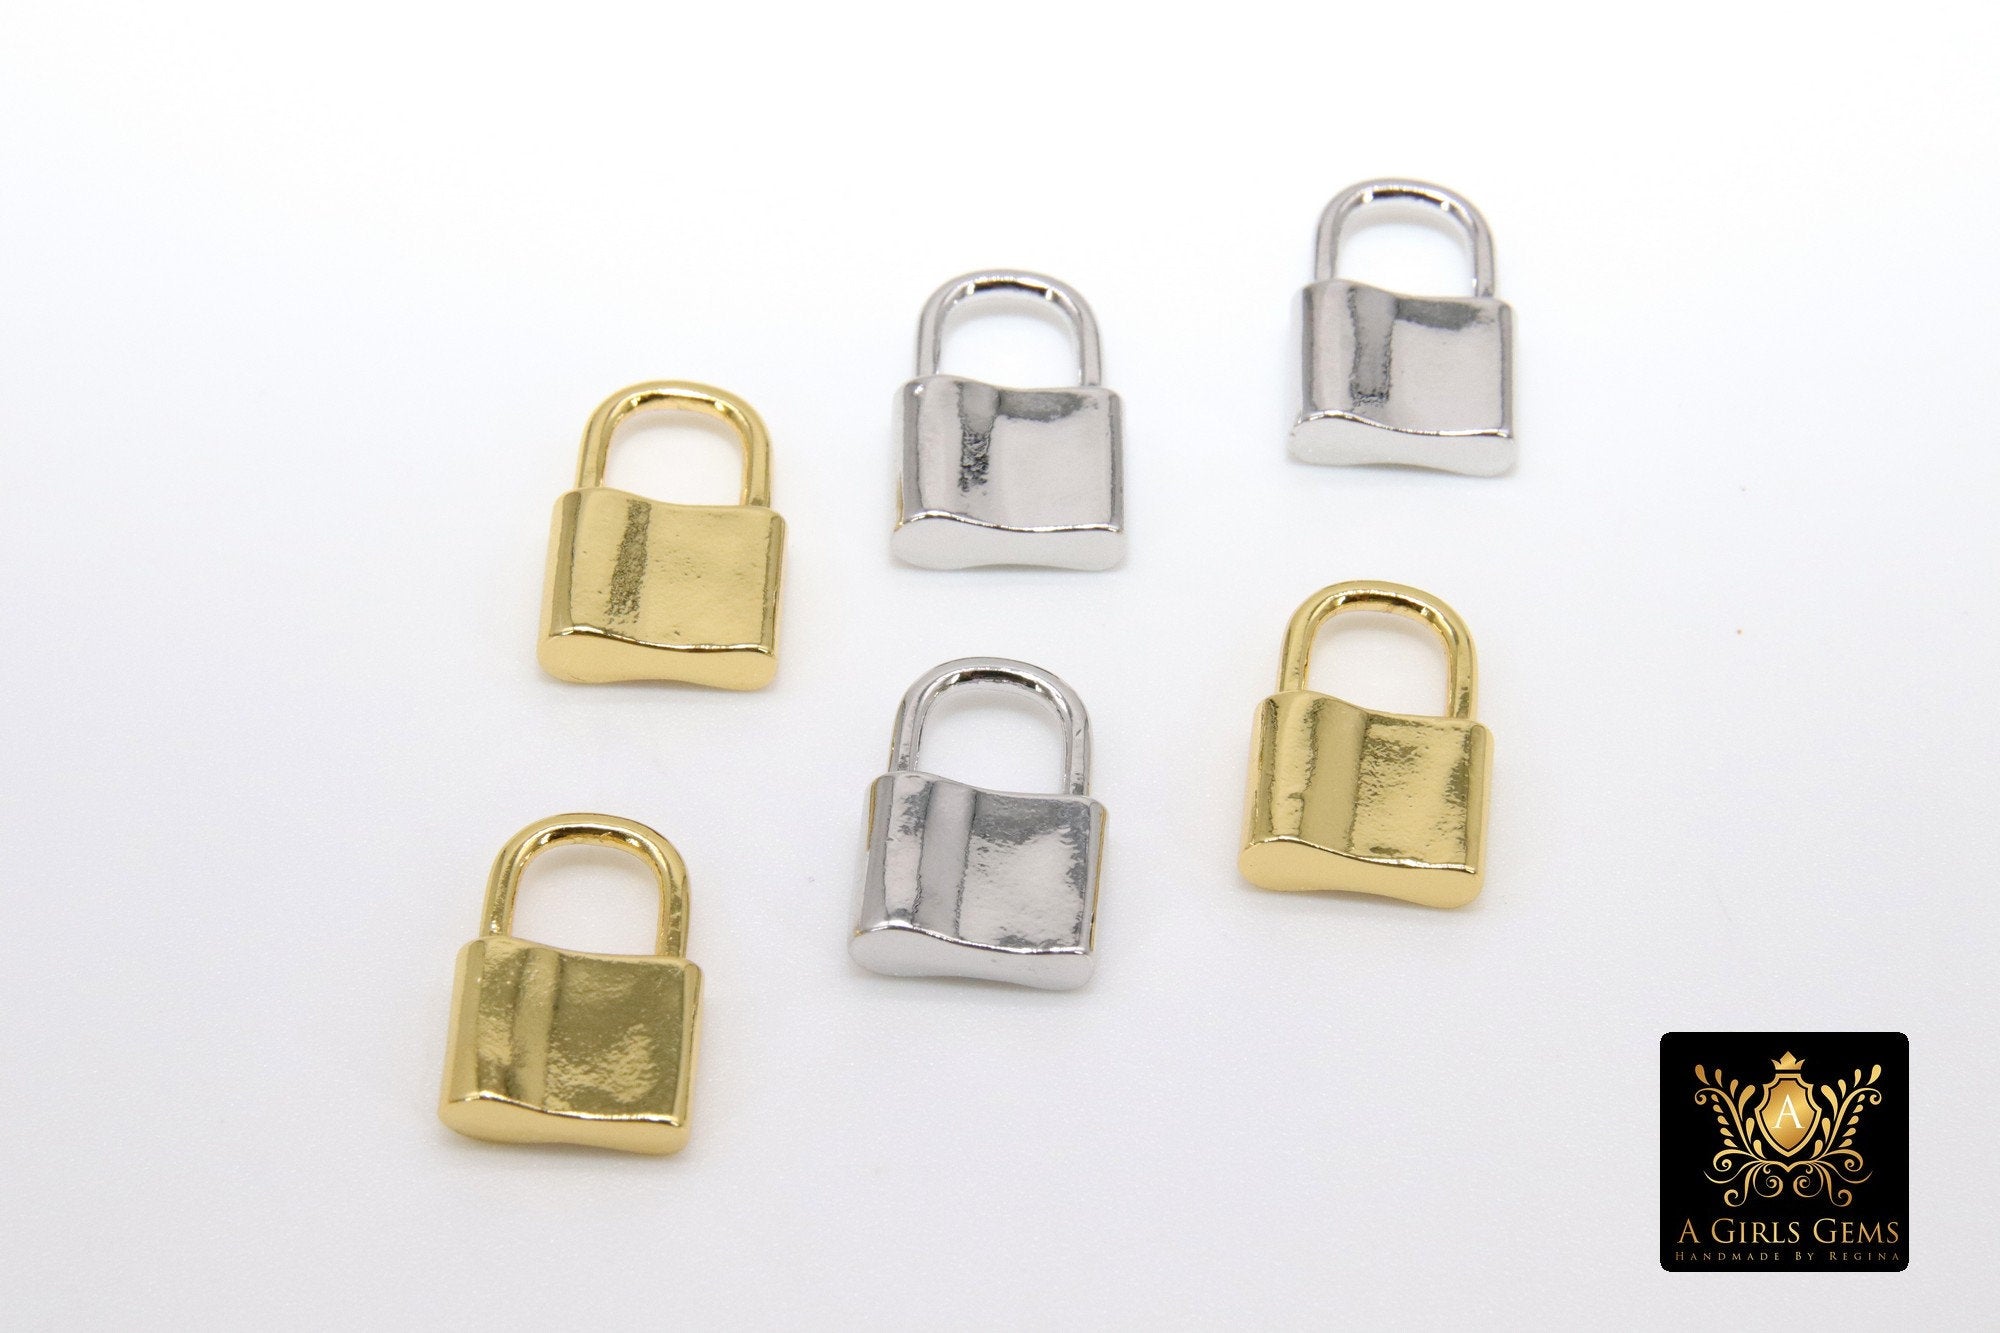 Gold Padlock Charms, Silver Lock Pendant Necklace and Bracelet Dangles #2555, 10 x 12 mm Small Jewelry Charm